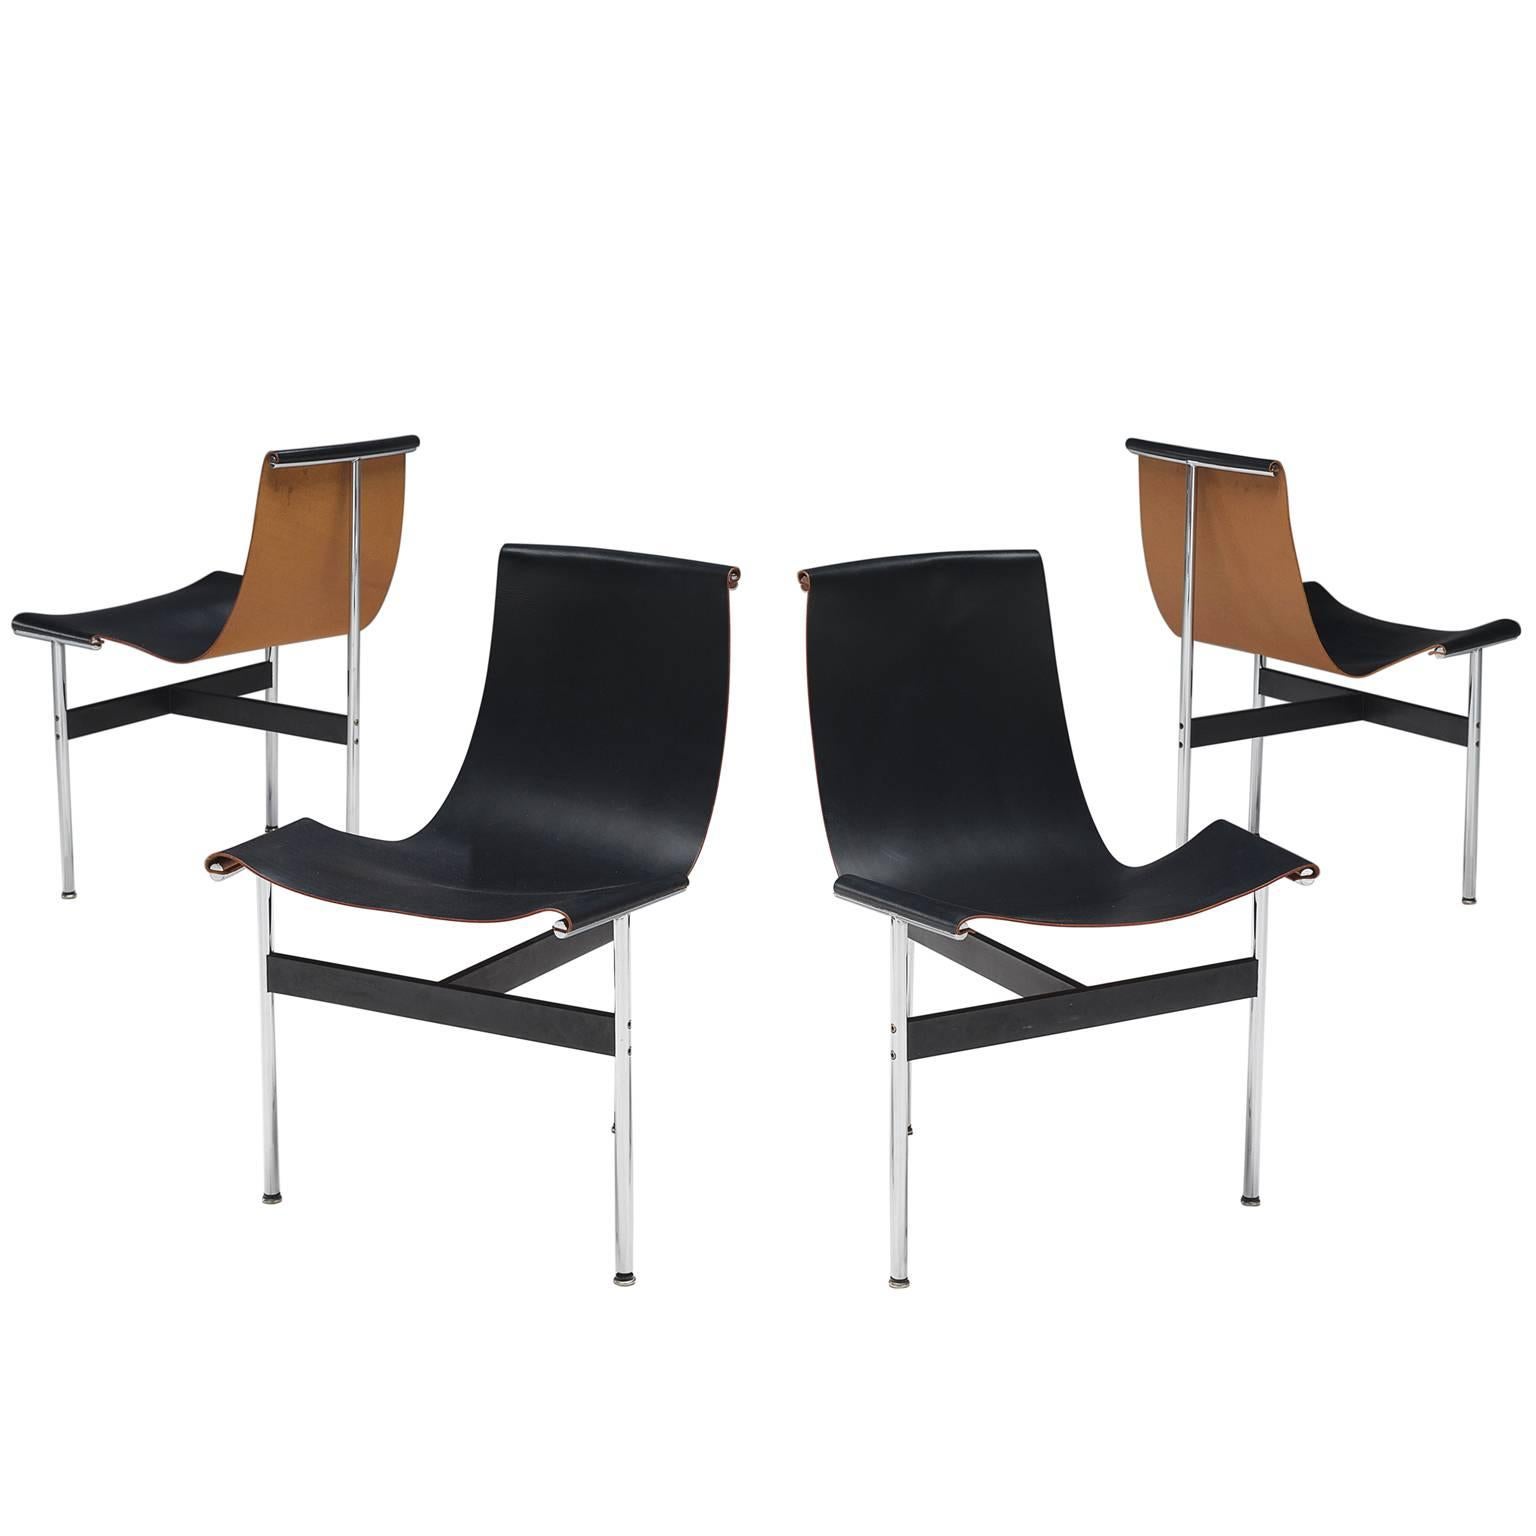 Katavolos Kelley and Littell T-Chairs in Original Black Leather